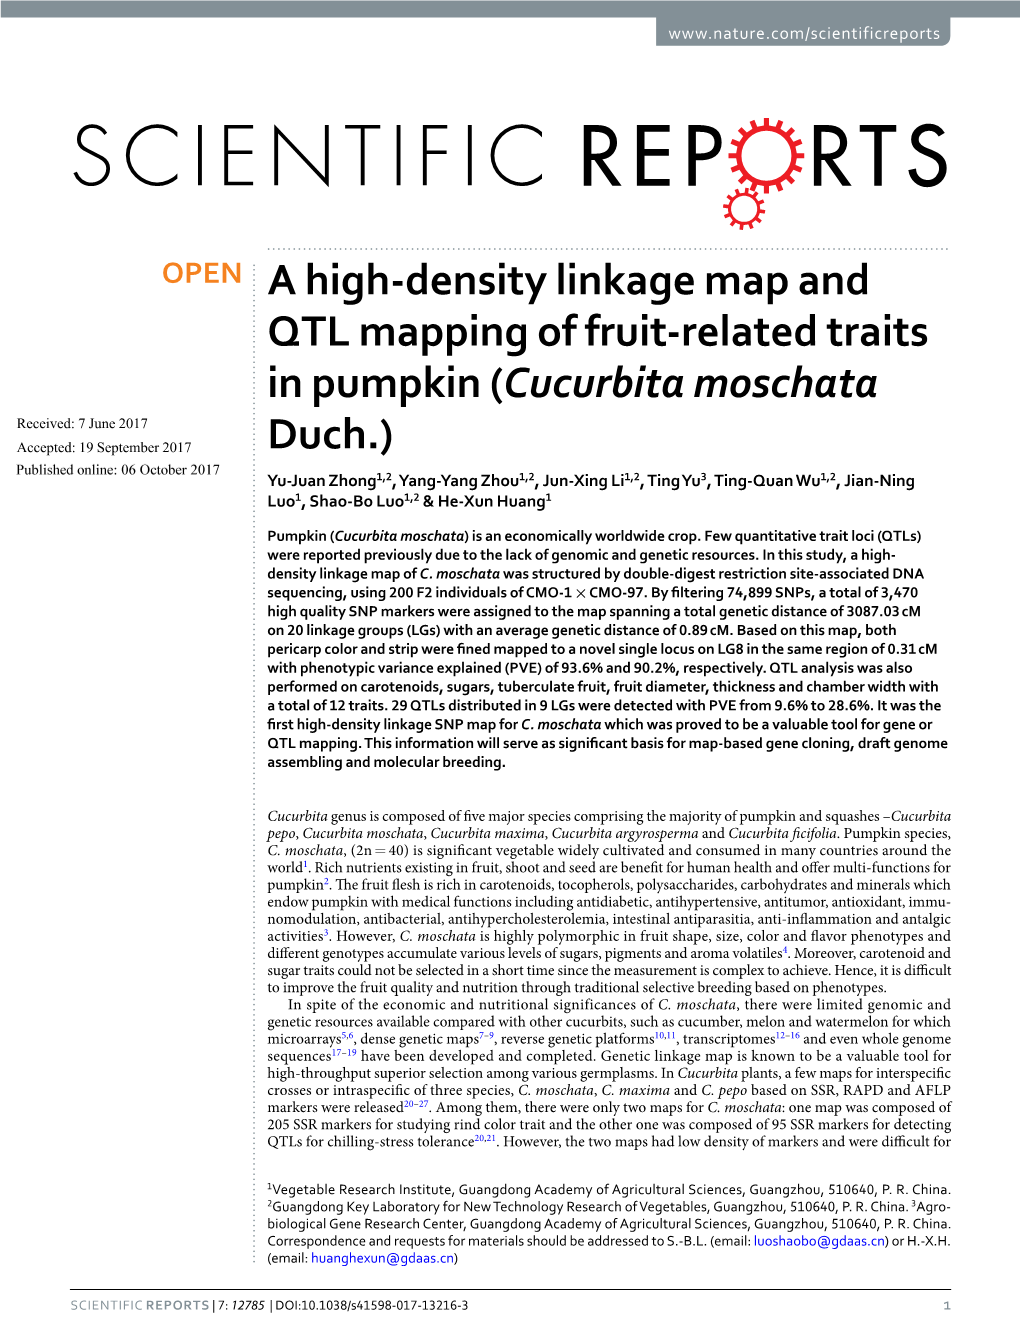 A High-Density Linkage Map and QTL Mapping of Fruit-Related Traits in Pumpkin (Cucurbita Moschata Duch.)